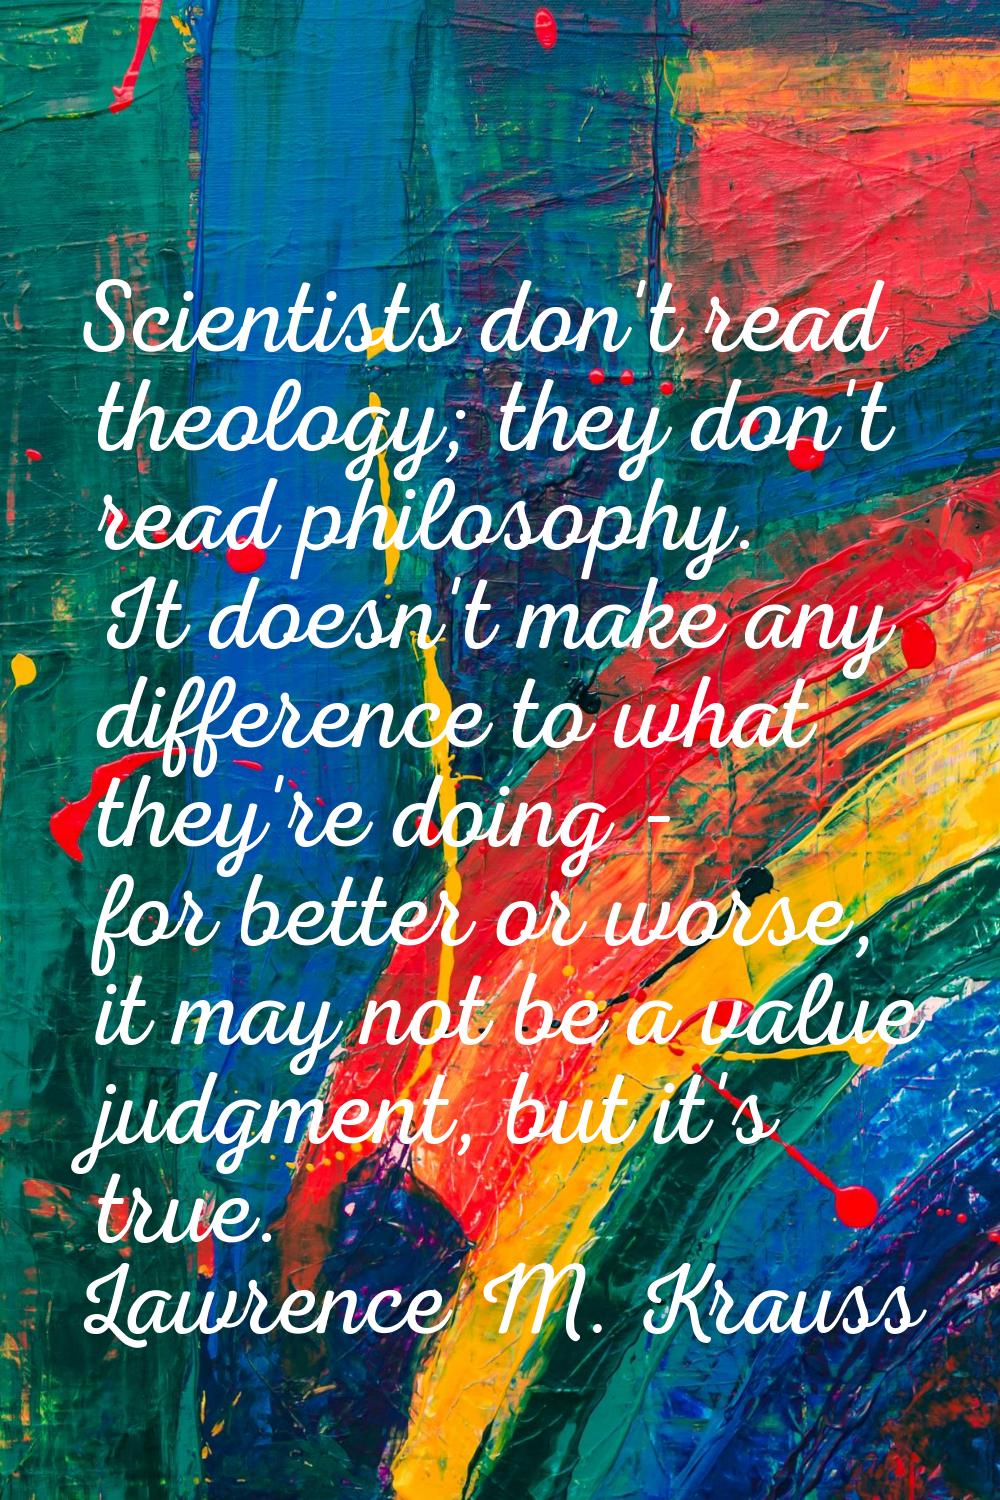 Scientists don't read theology; they don't read philosophy. It doesn't make any difference to what 